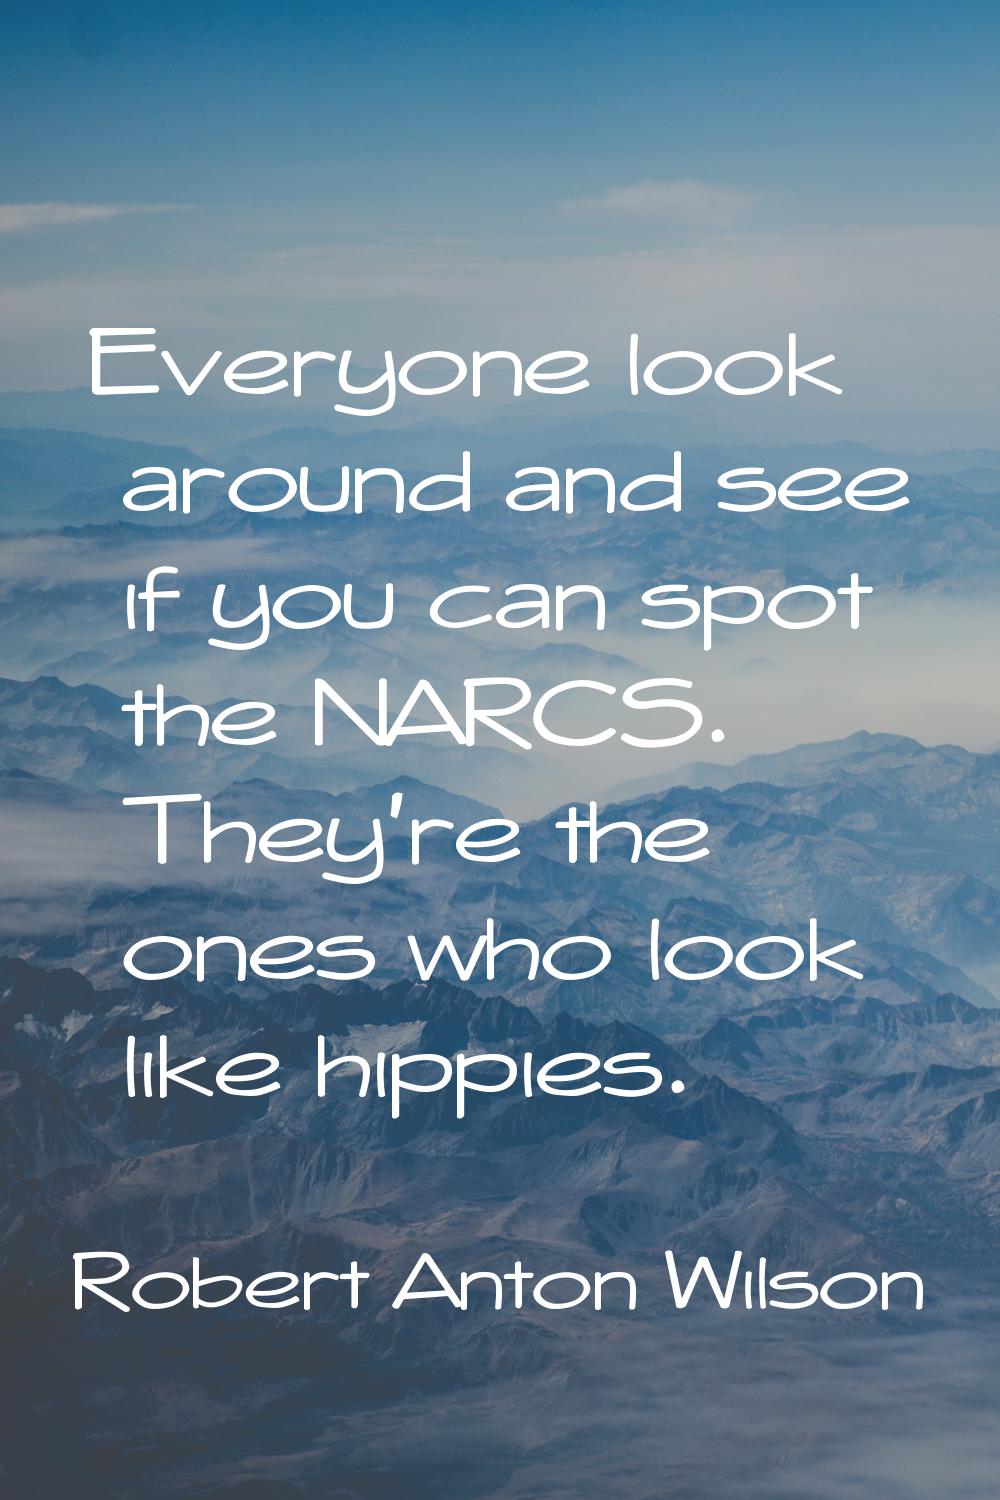 Everyone look around and see if you can spot the NARCS. They're the ones who look like hippies.